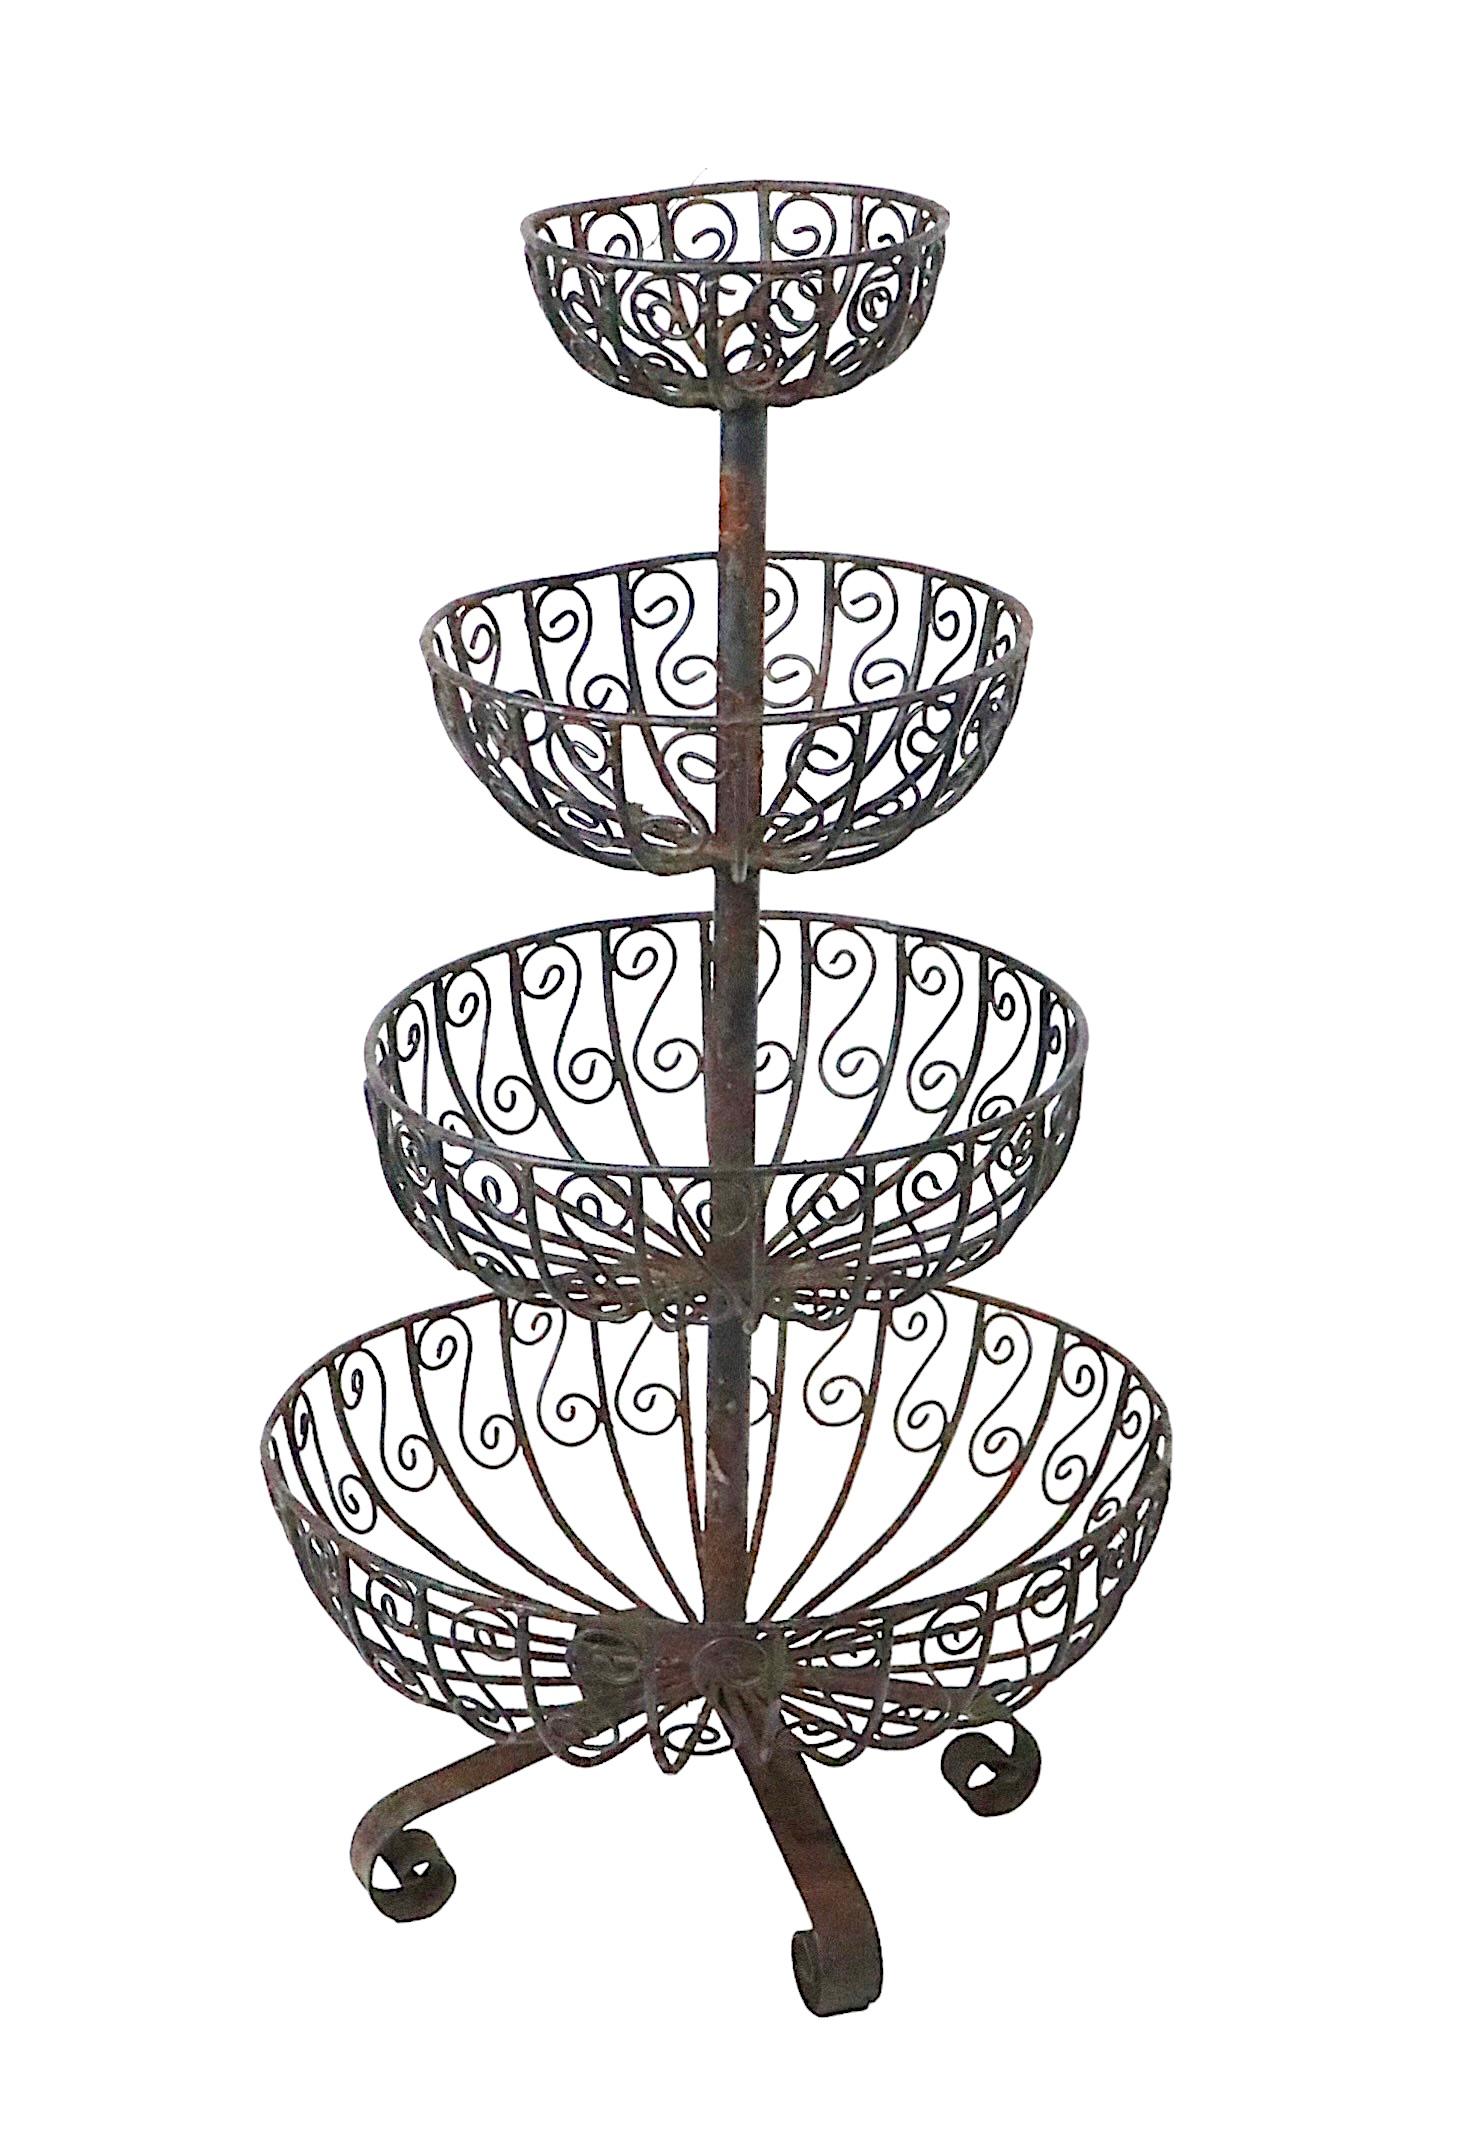 Charming wrought iron planter having four basins each of graduated size in defending order, mounted on the vertical standard, with a four foot curlicue form base. This nice decorative stand is structurally sound and sturdy, it looks like it probably